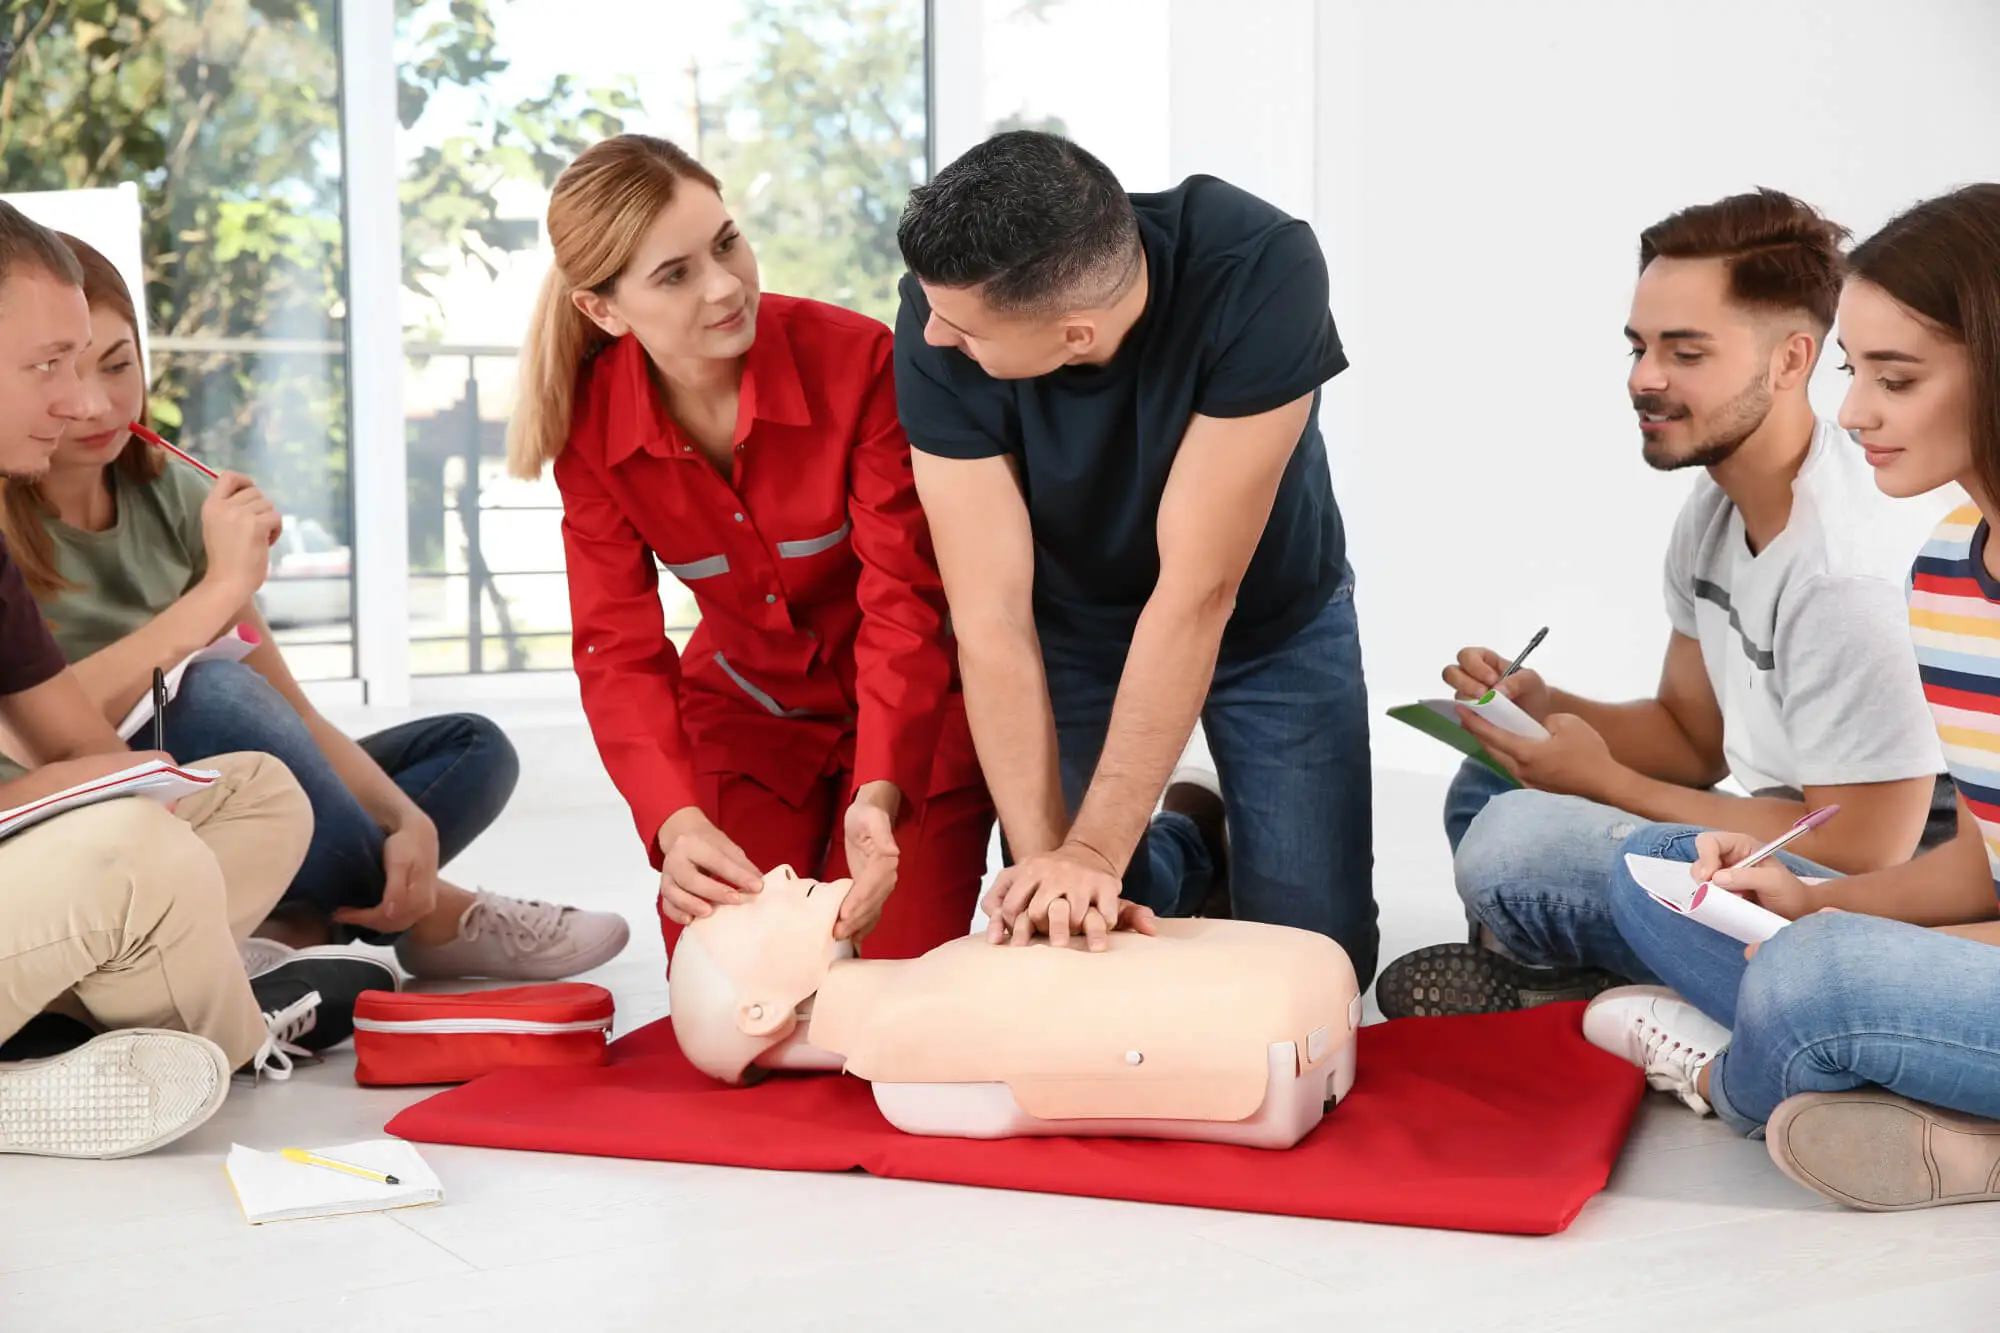 First Aid Certification Online